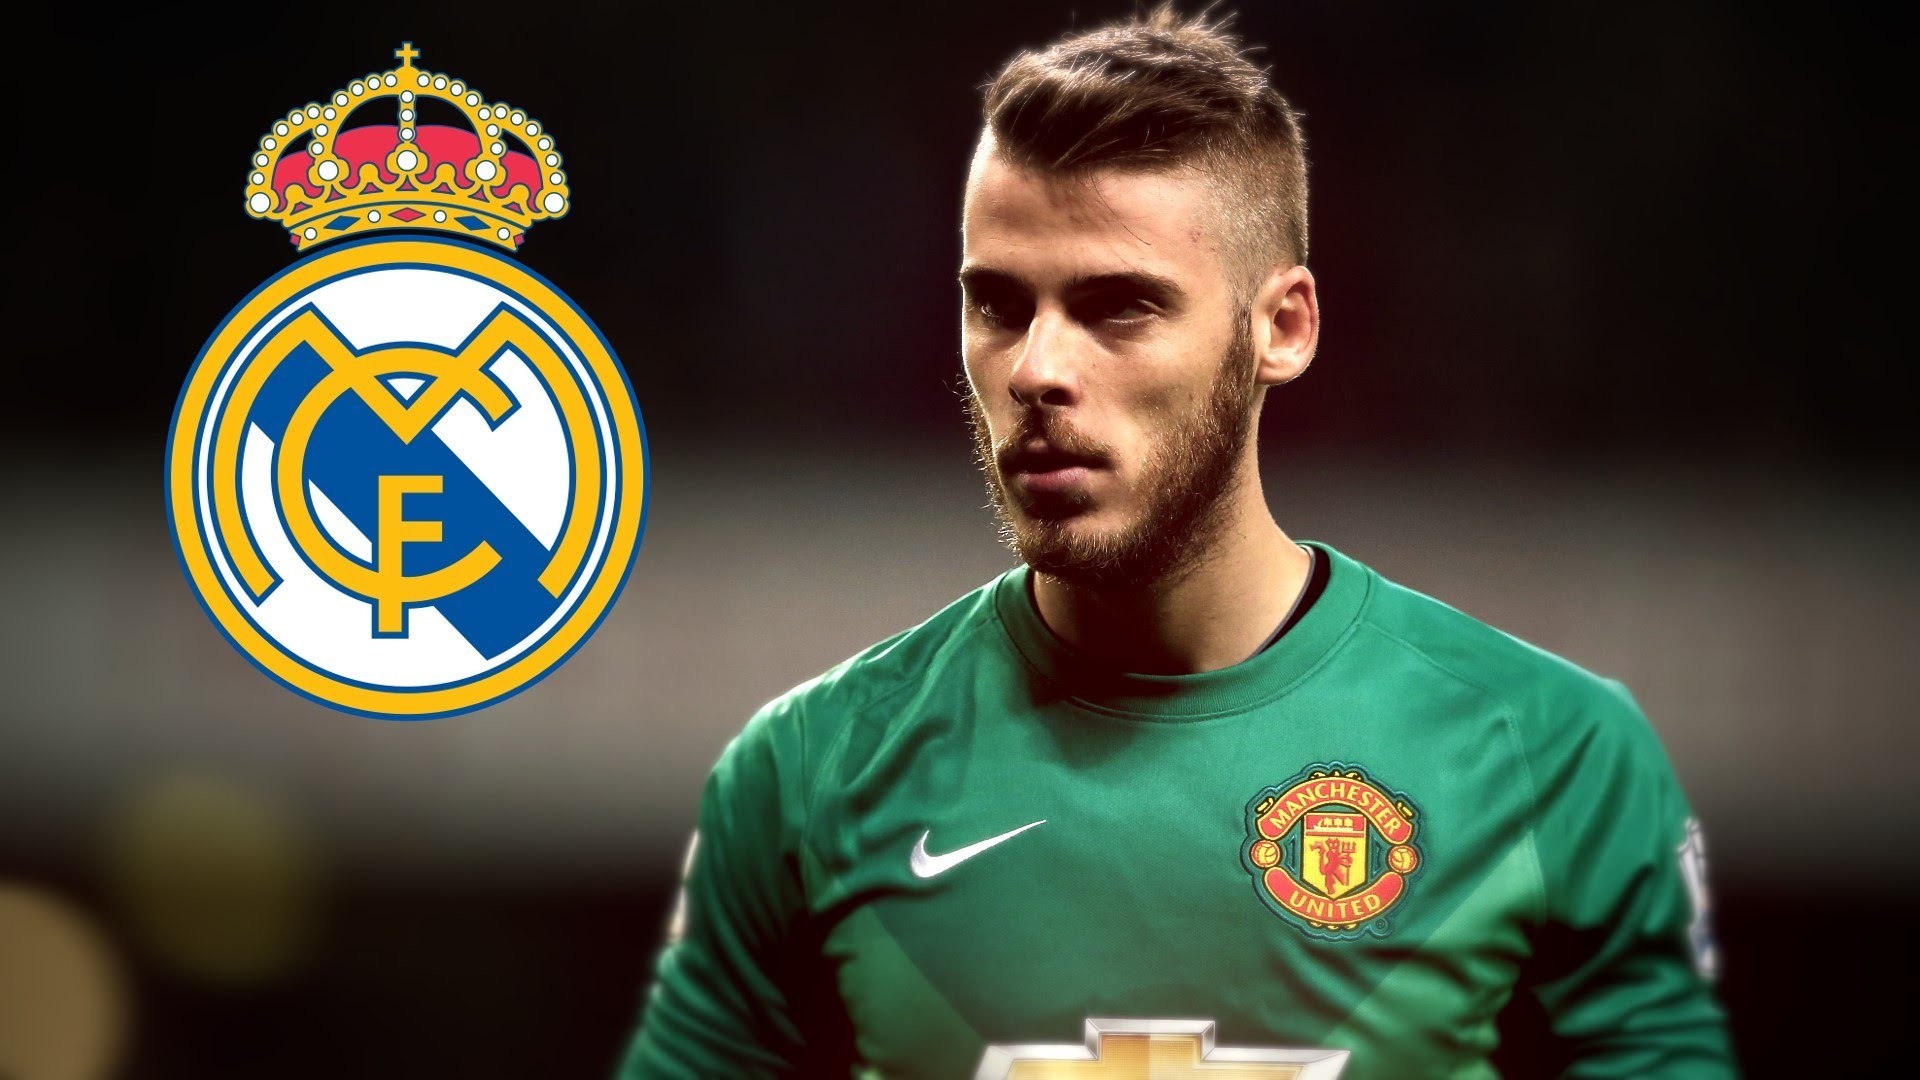 1920x1080 David de gea - Best Saves Manchester United - Welcome to Real Madrid (2015)